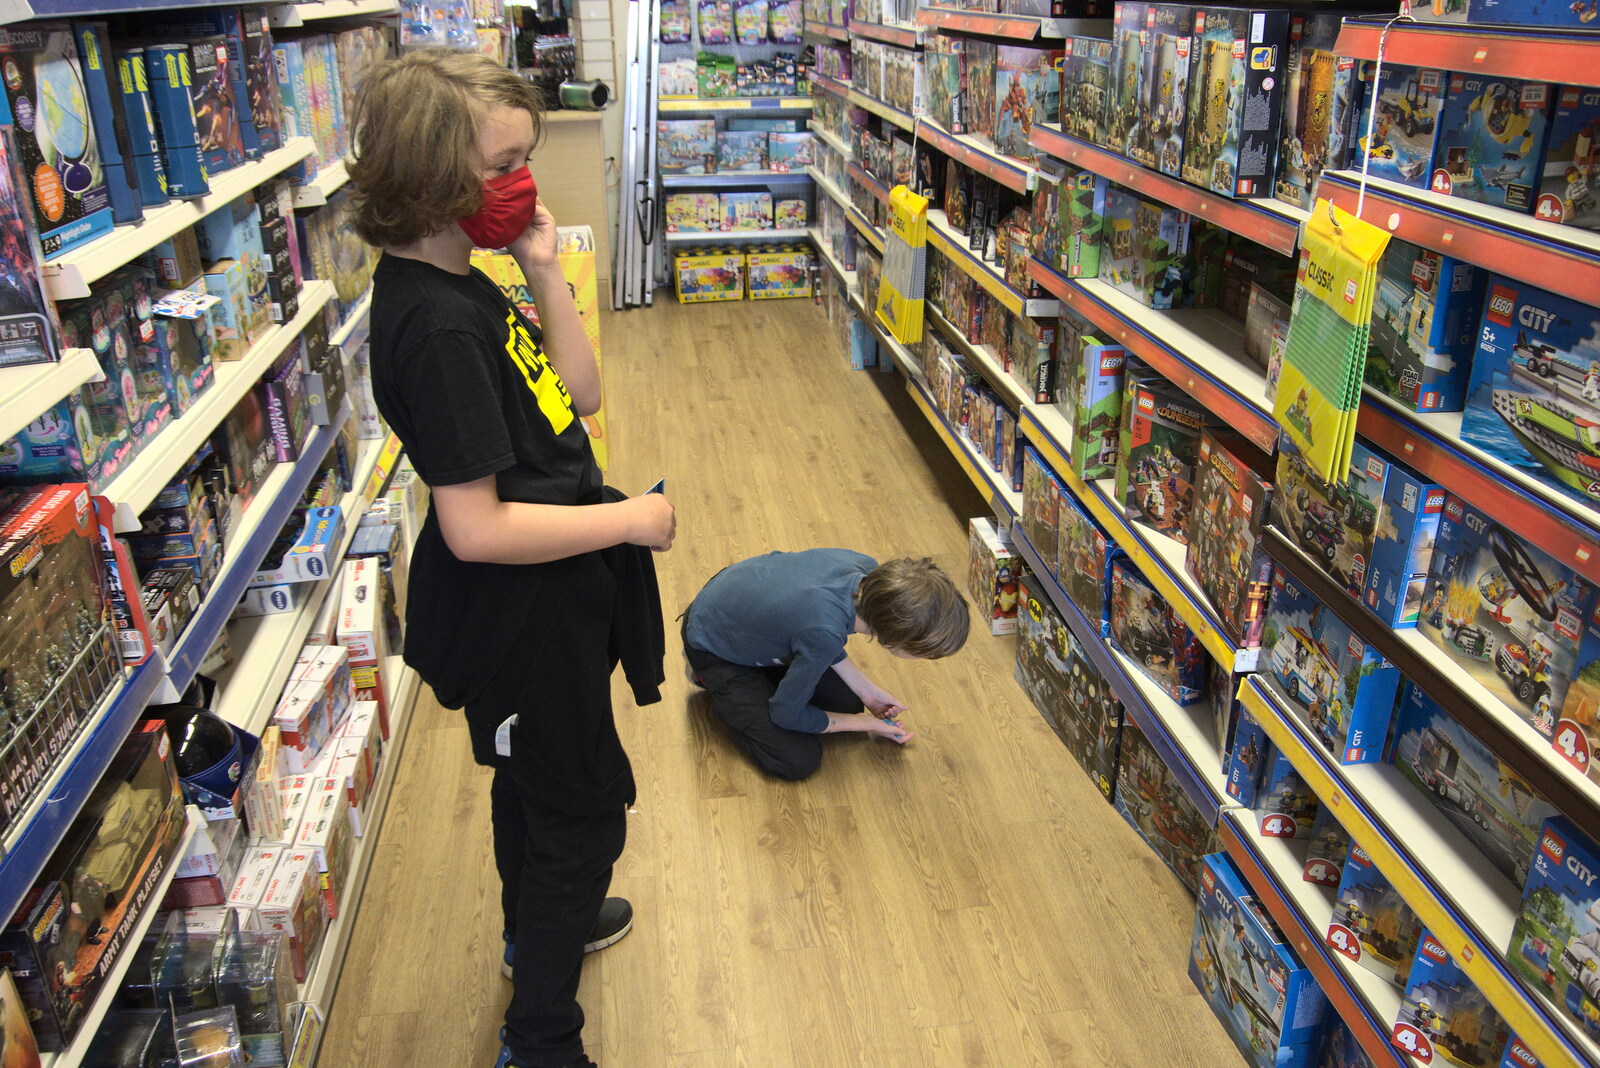 The boys in Toymaster toy shop from A Weekend at the Angel Hotel, Bury St. Edmunds, Suffolk - 5th June 2021